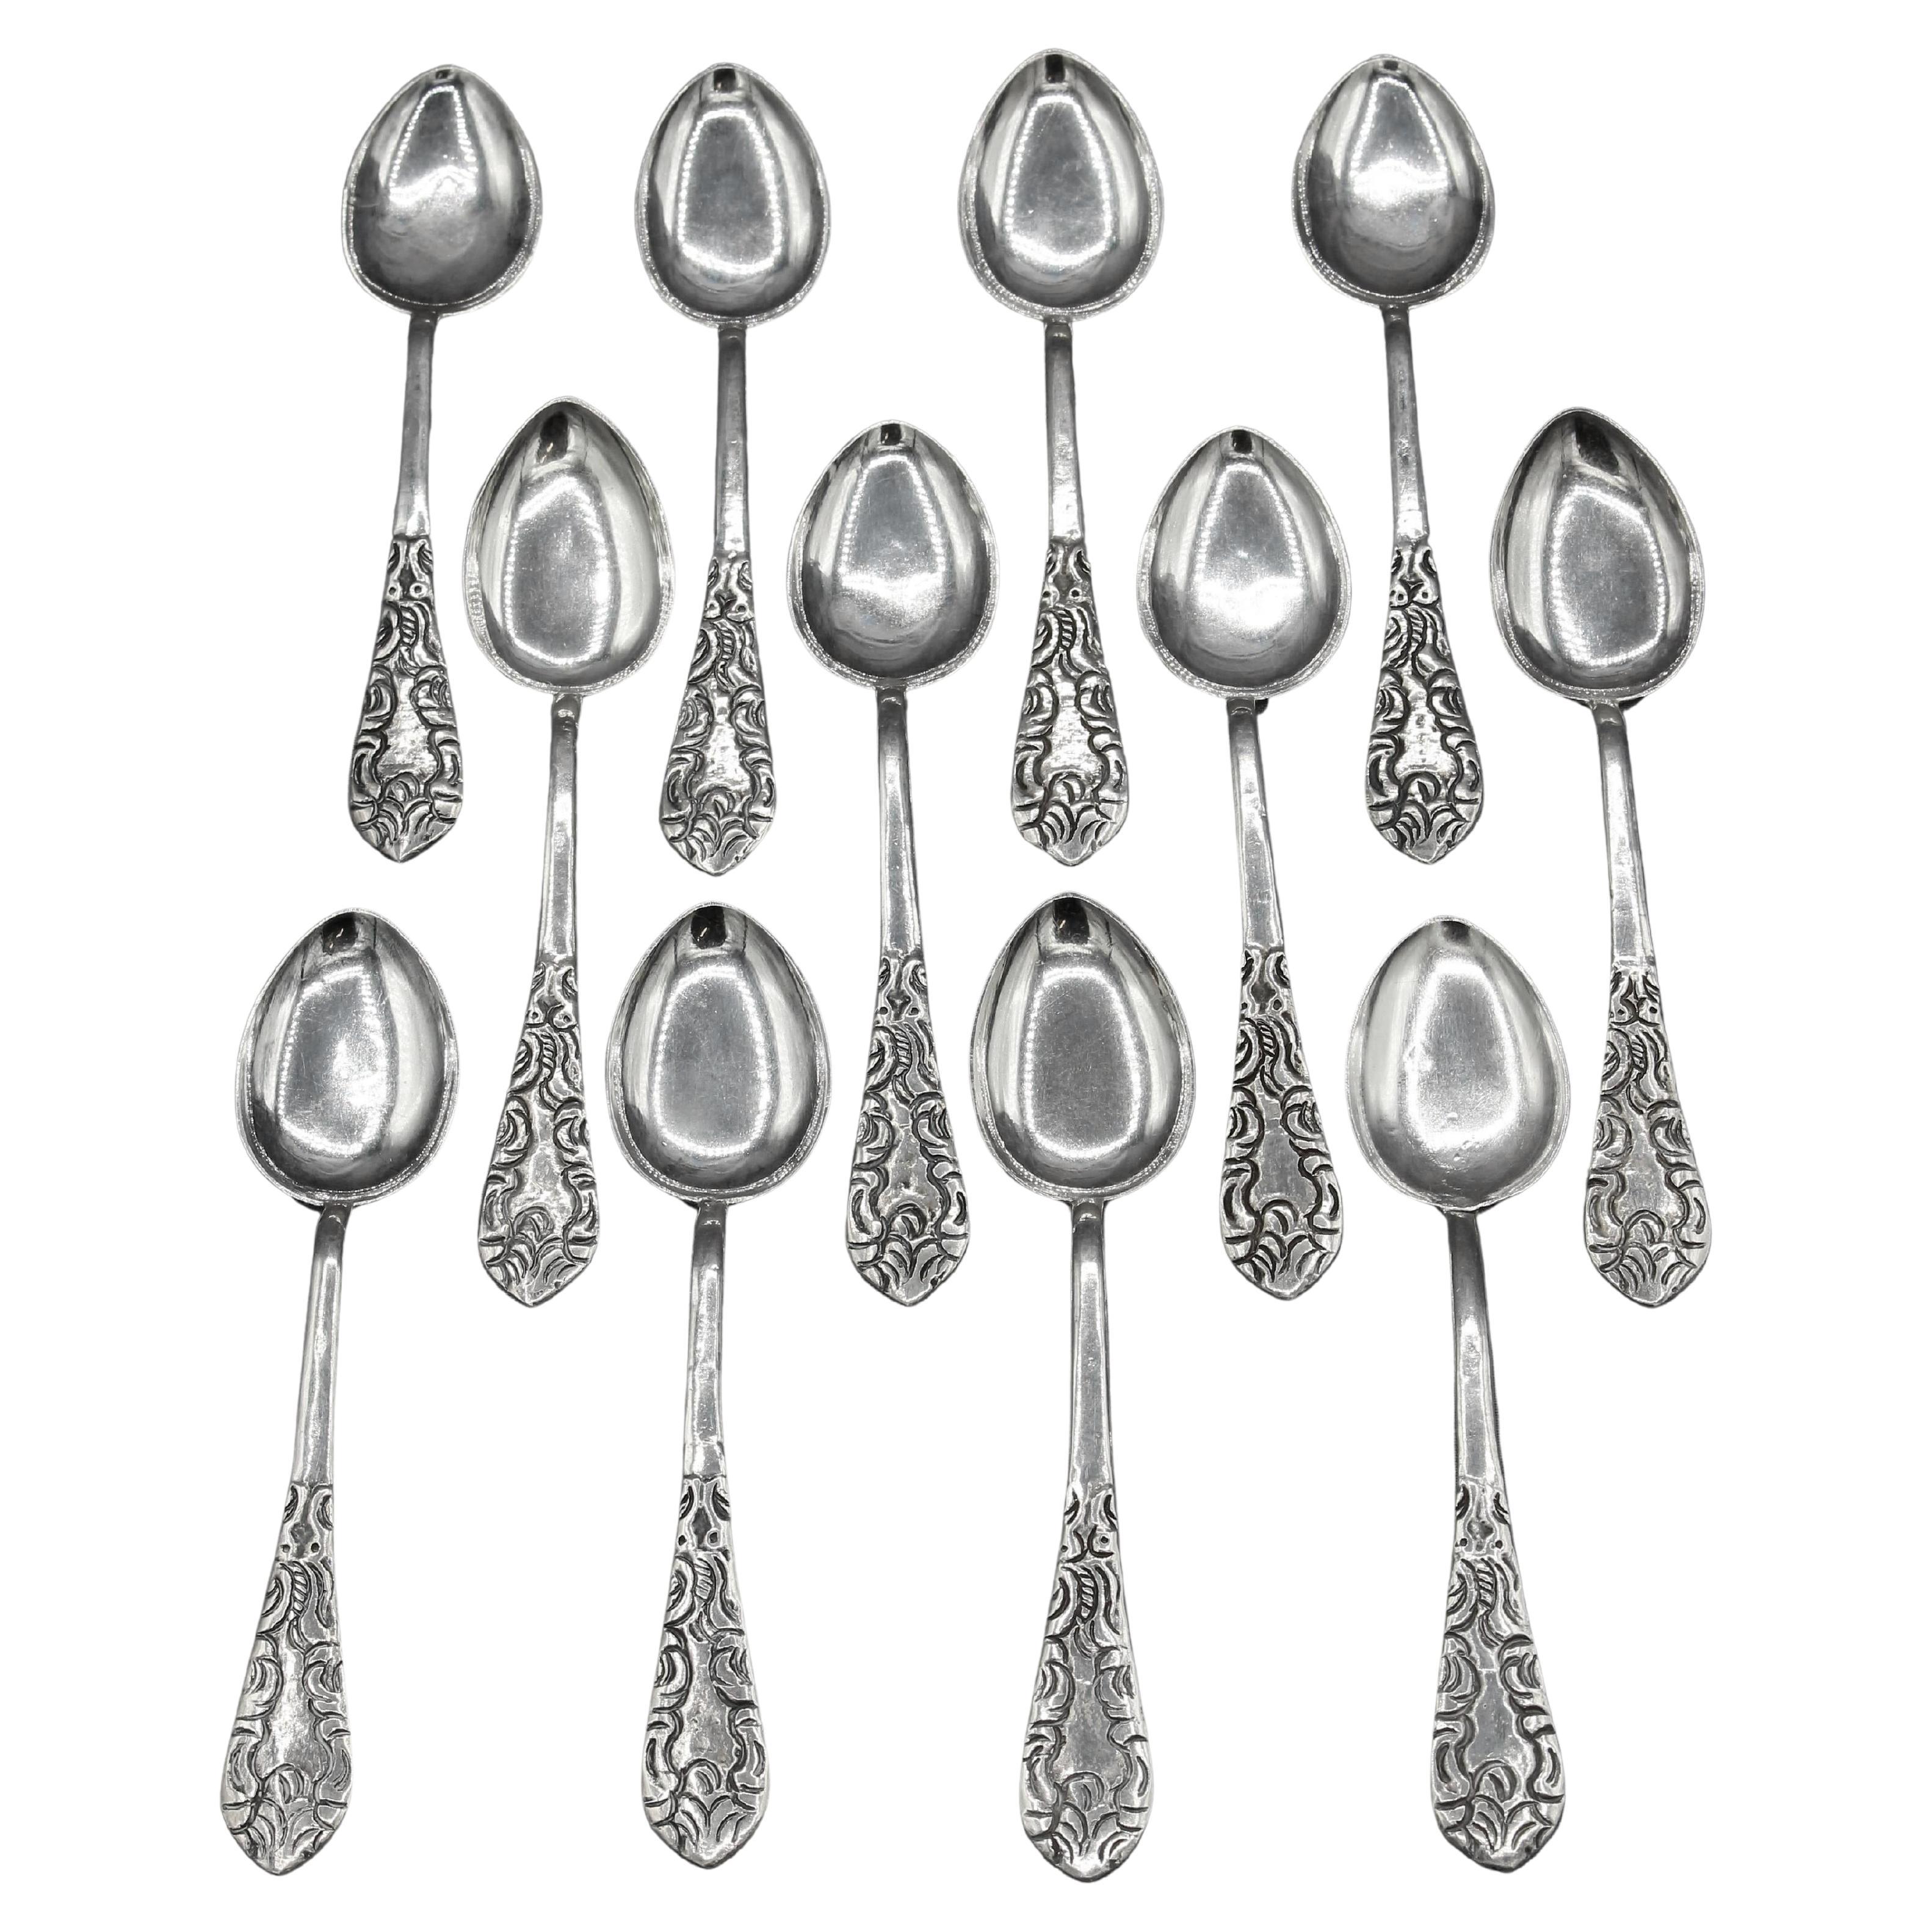 Circa 1930s Set of 12 Peruvian Sterling Silver Demitasse Spoons For Sale